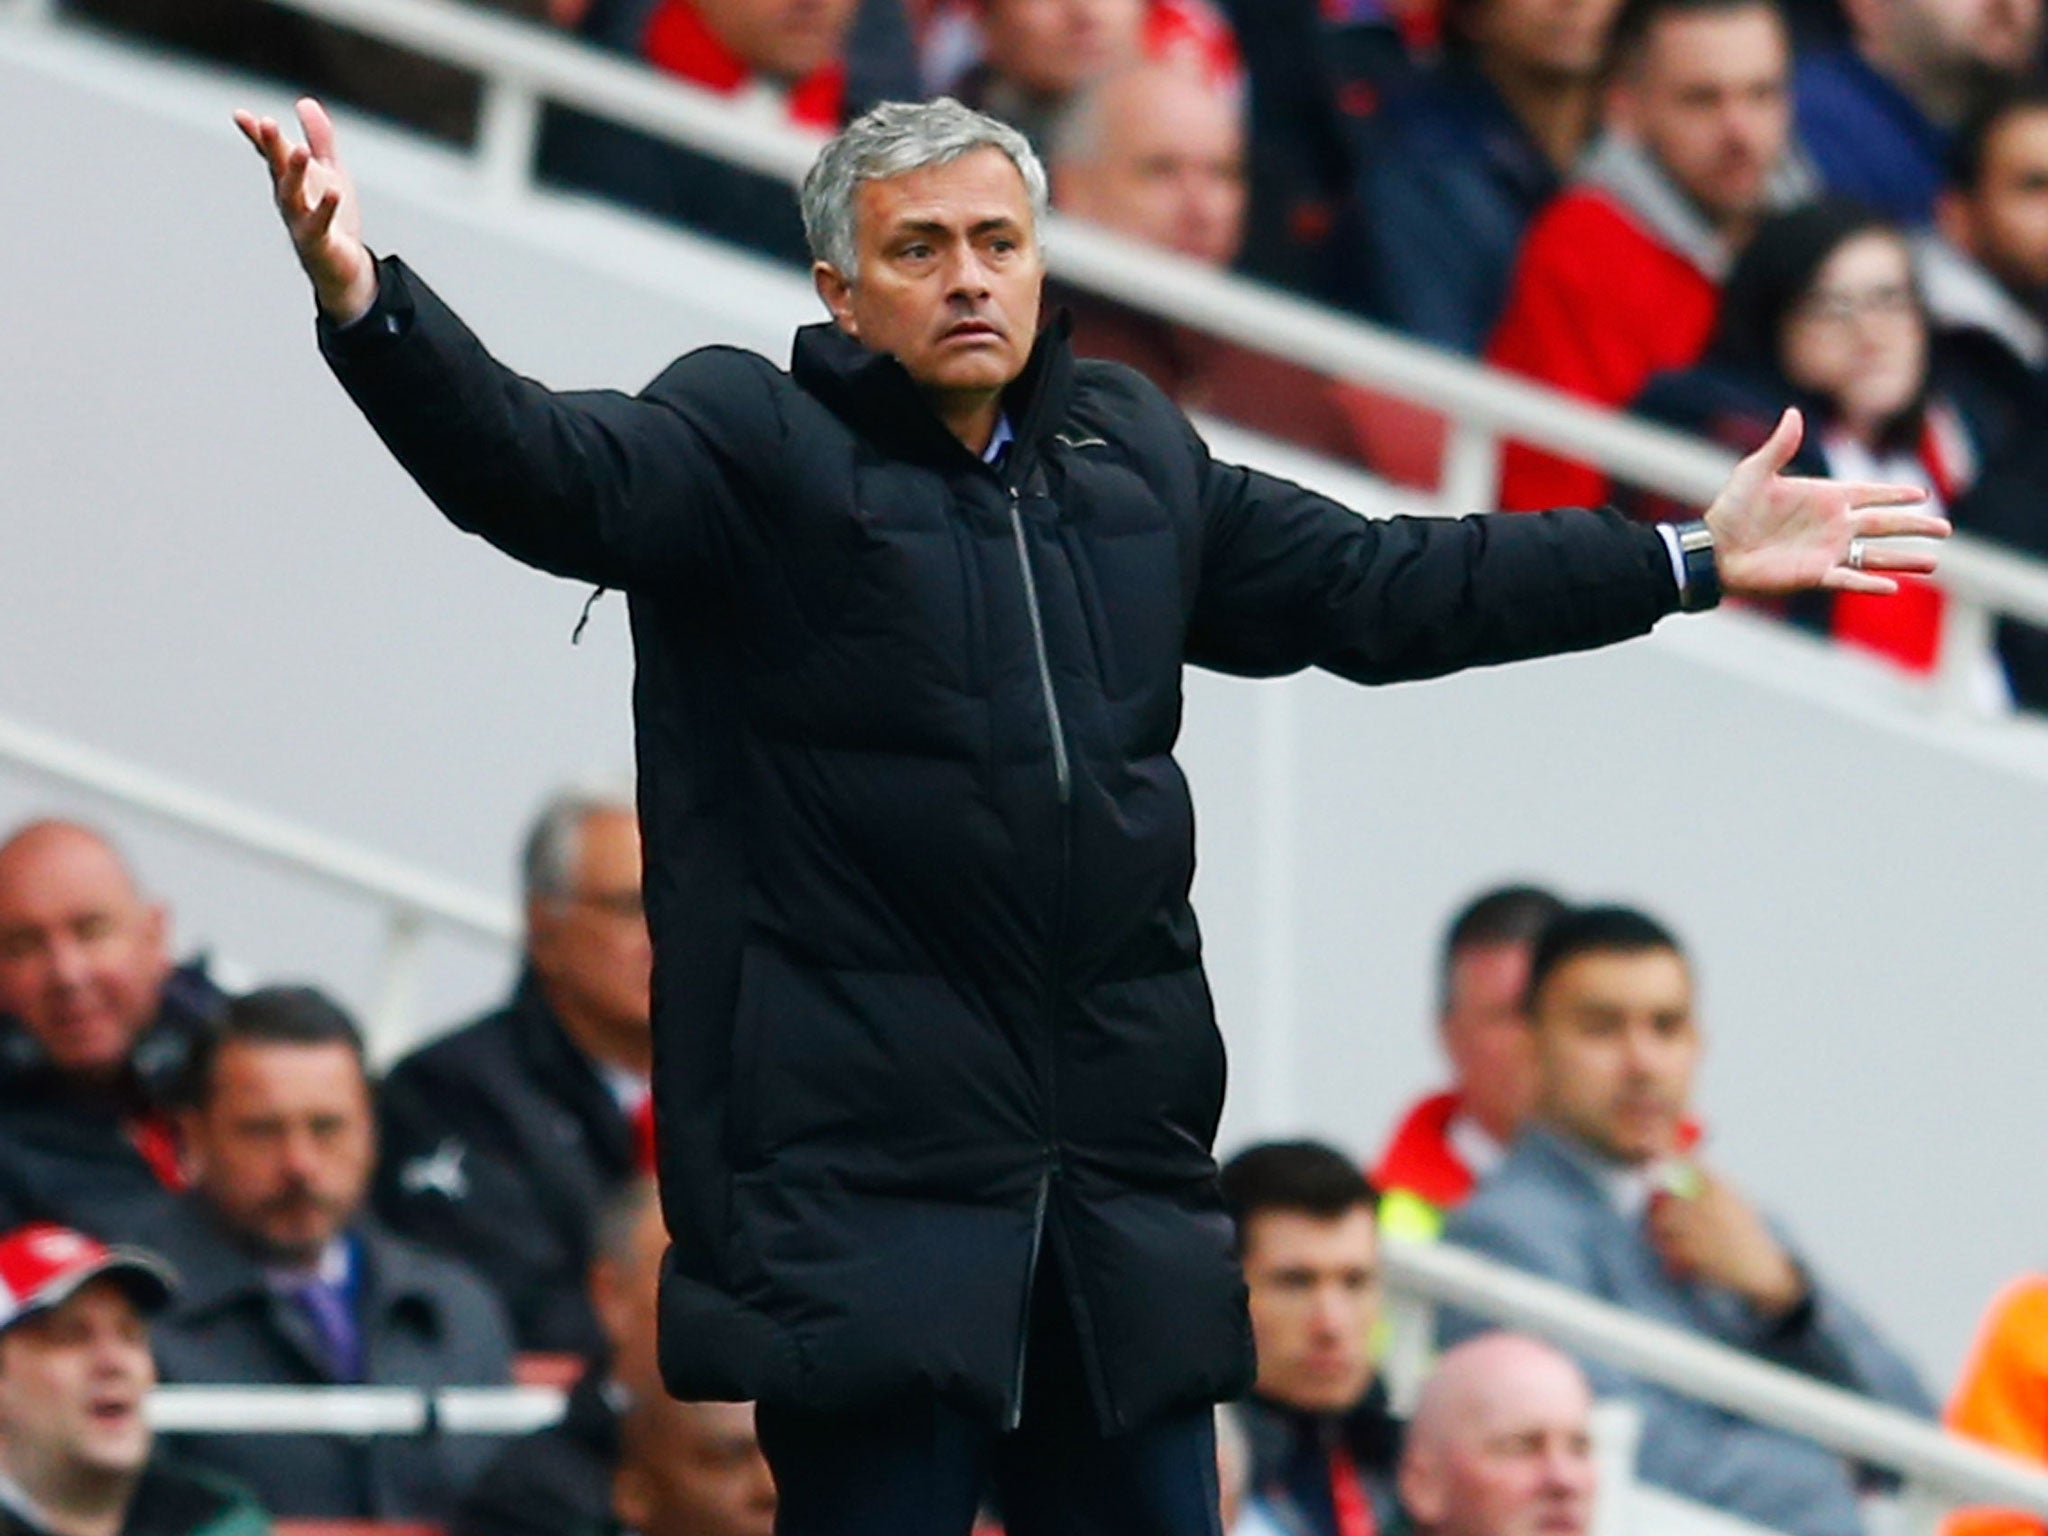 Jose Mourinho gestures from the sidelines at the Emirates